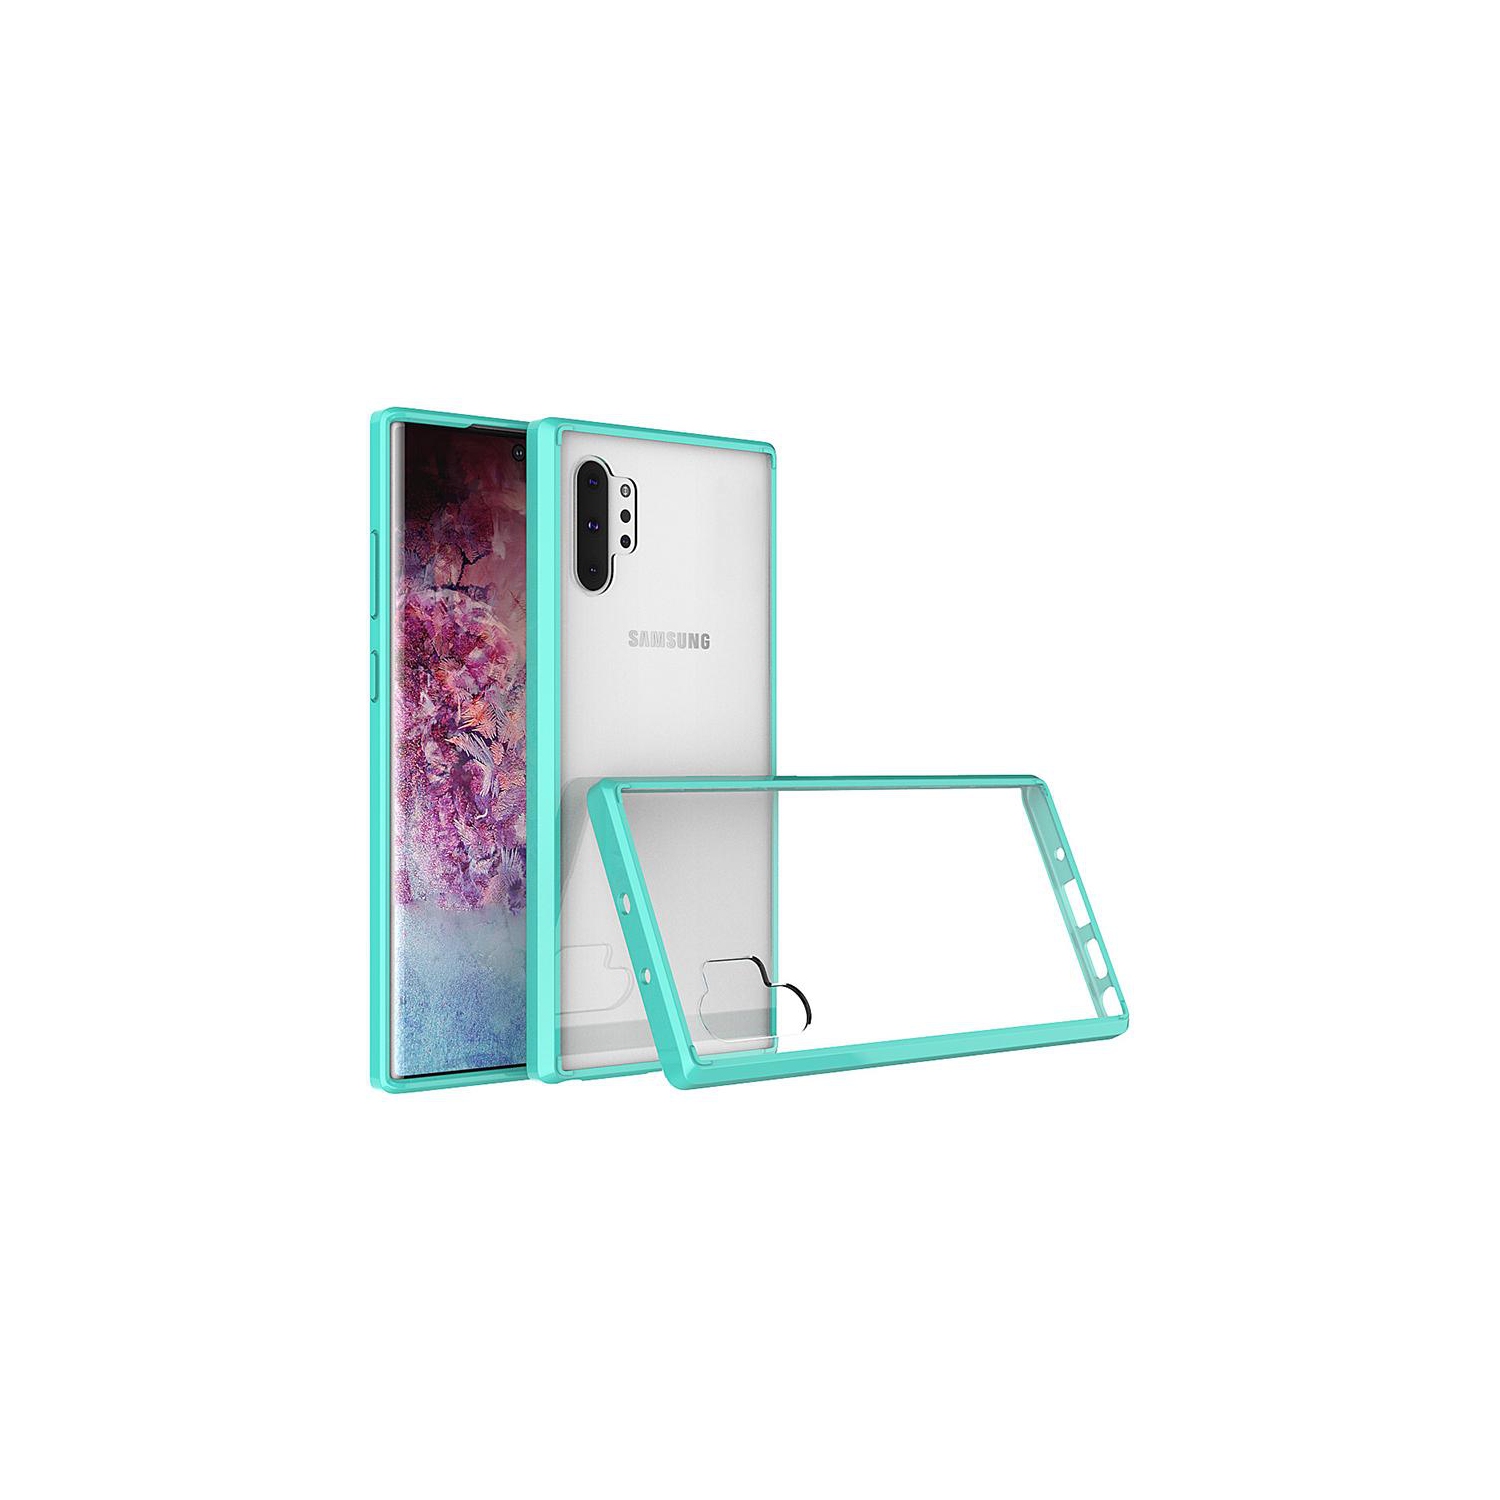 PANDACO Acrylic Mint Hard Clear Case for Samsung Galaxy Note 10+